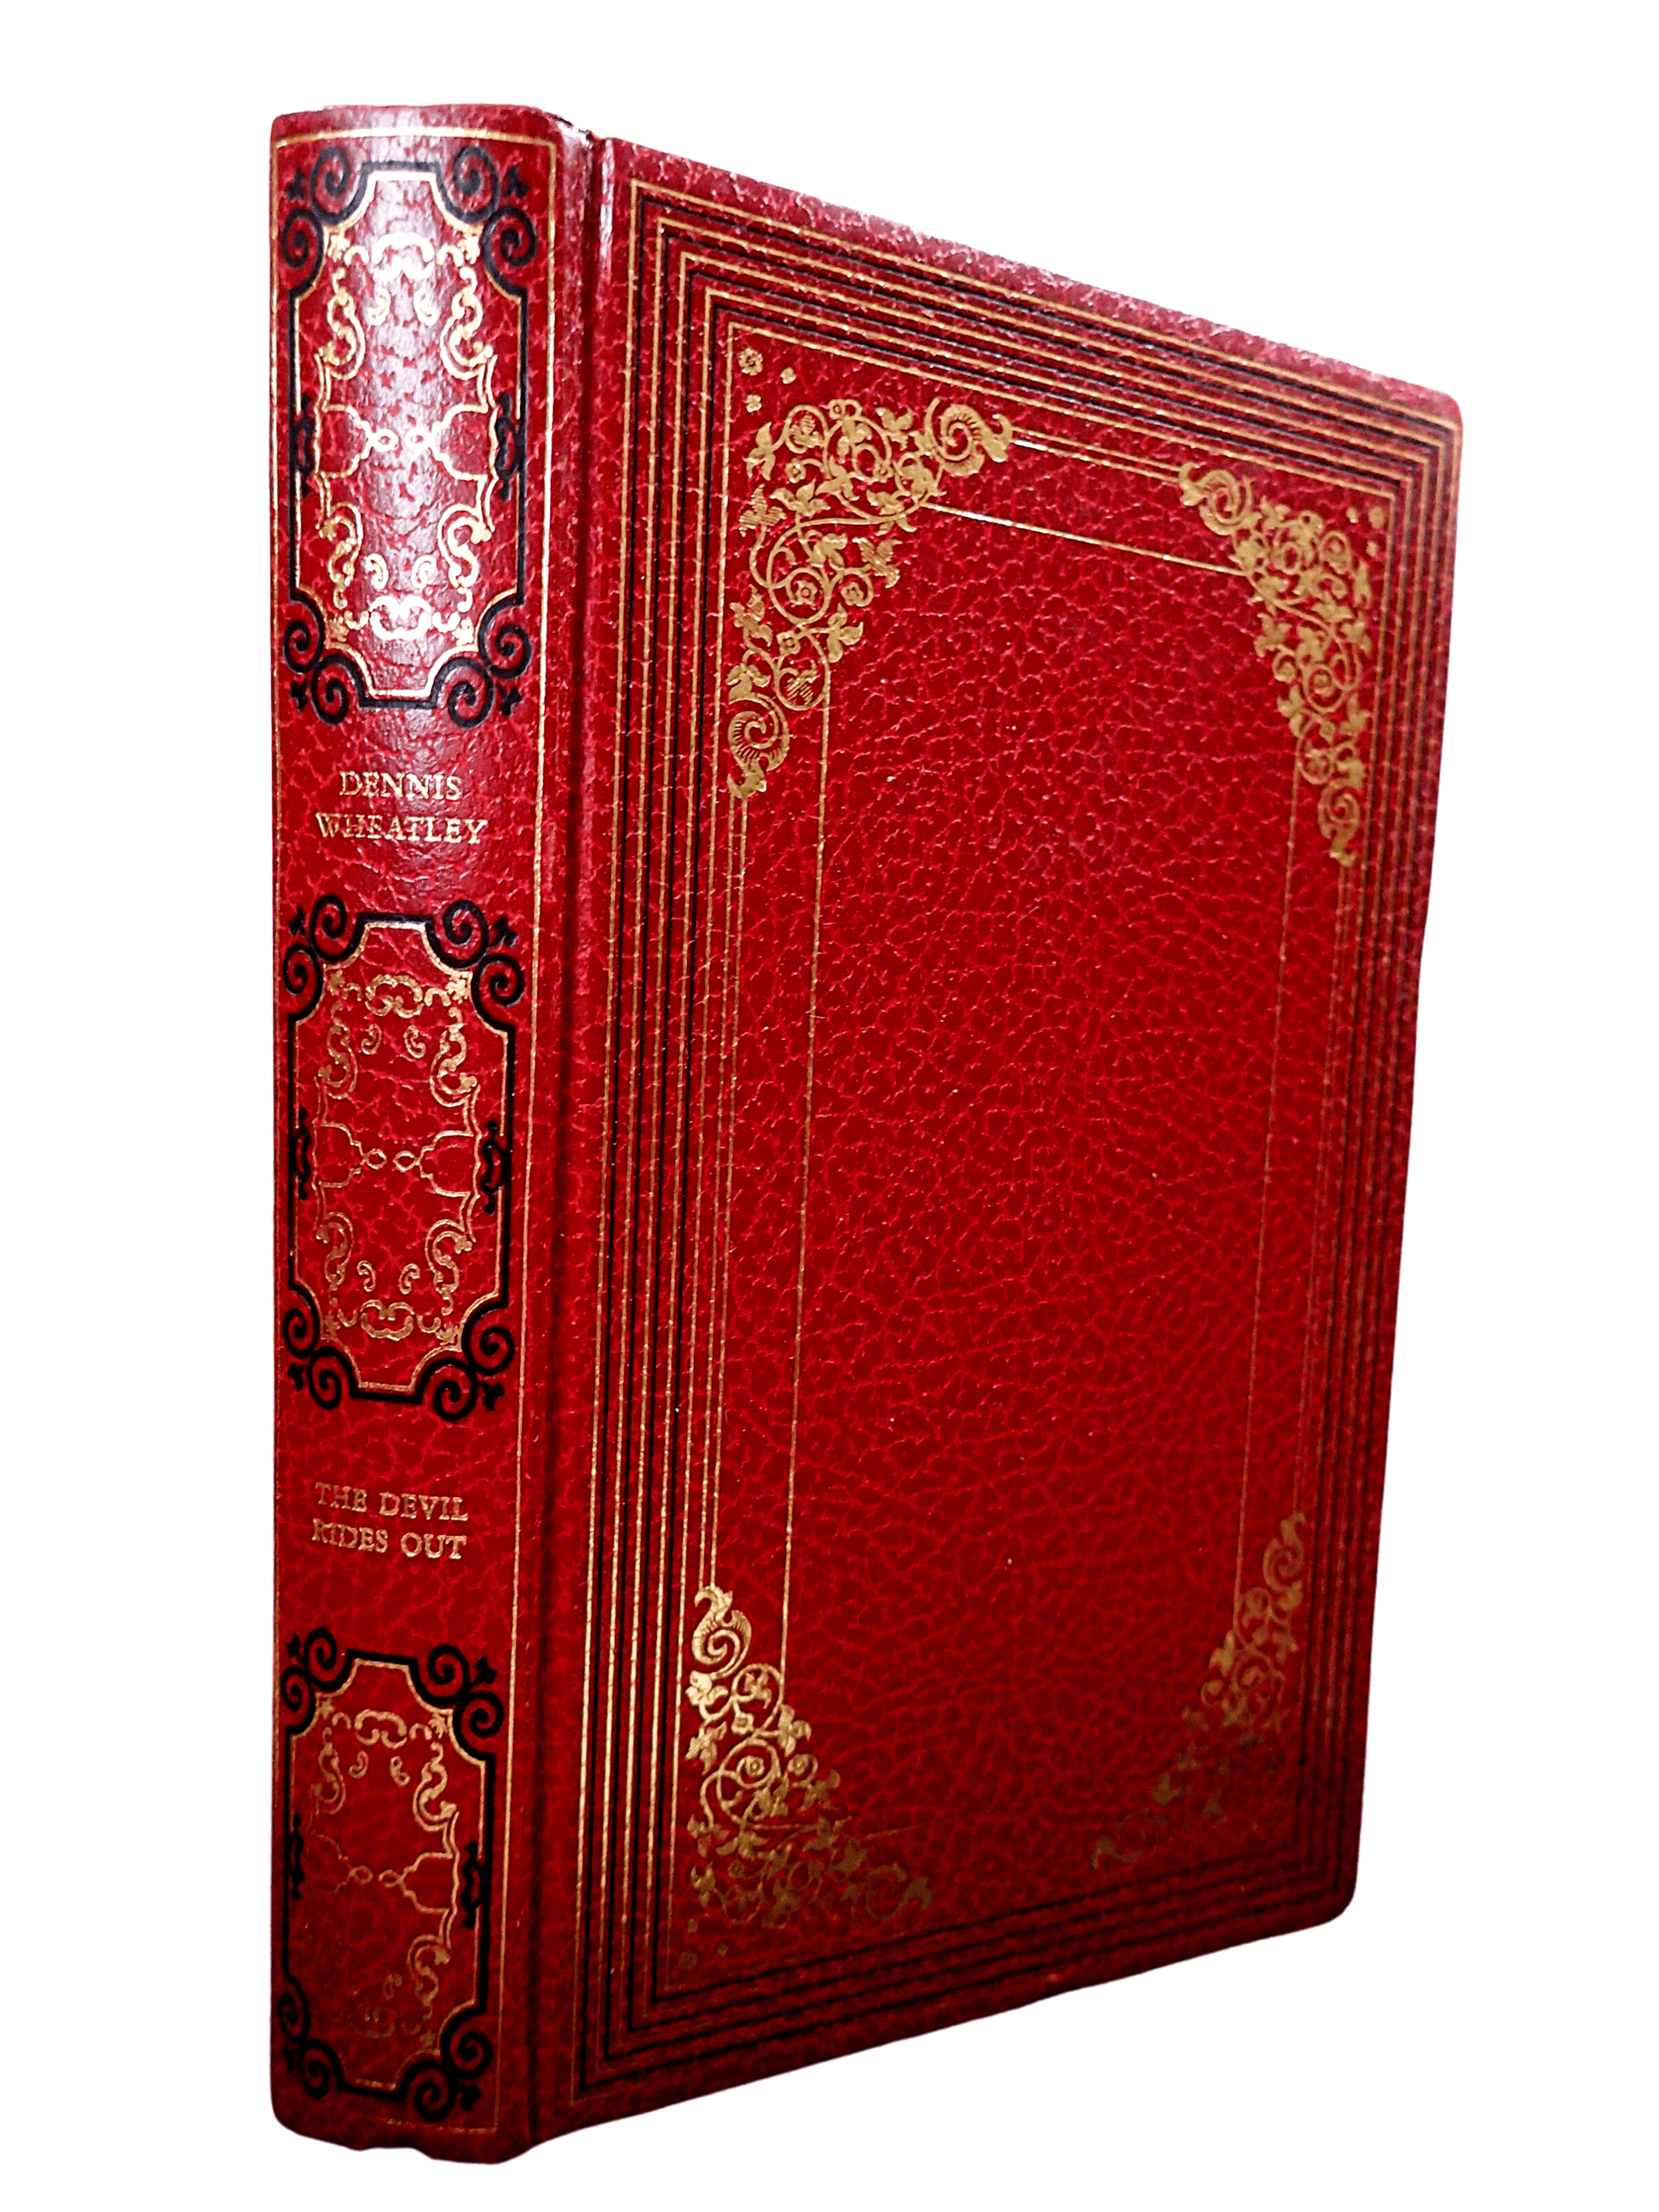 The Devil Rides Red, black and gilt decorated Dennis Wheatley with vegan Leather binding.